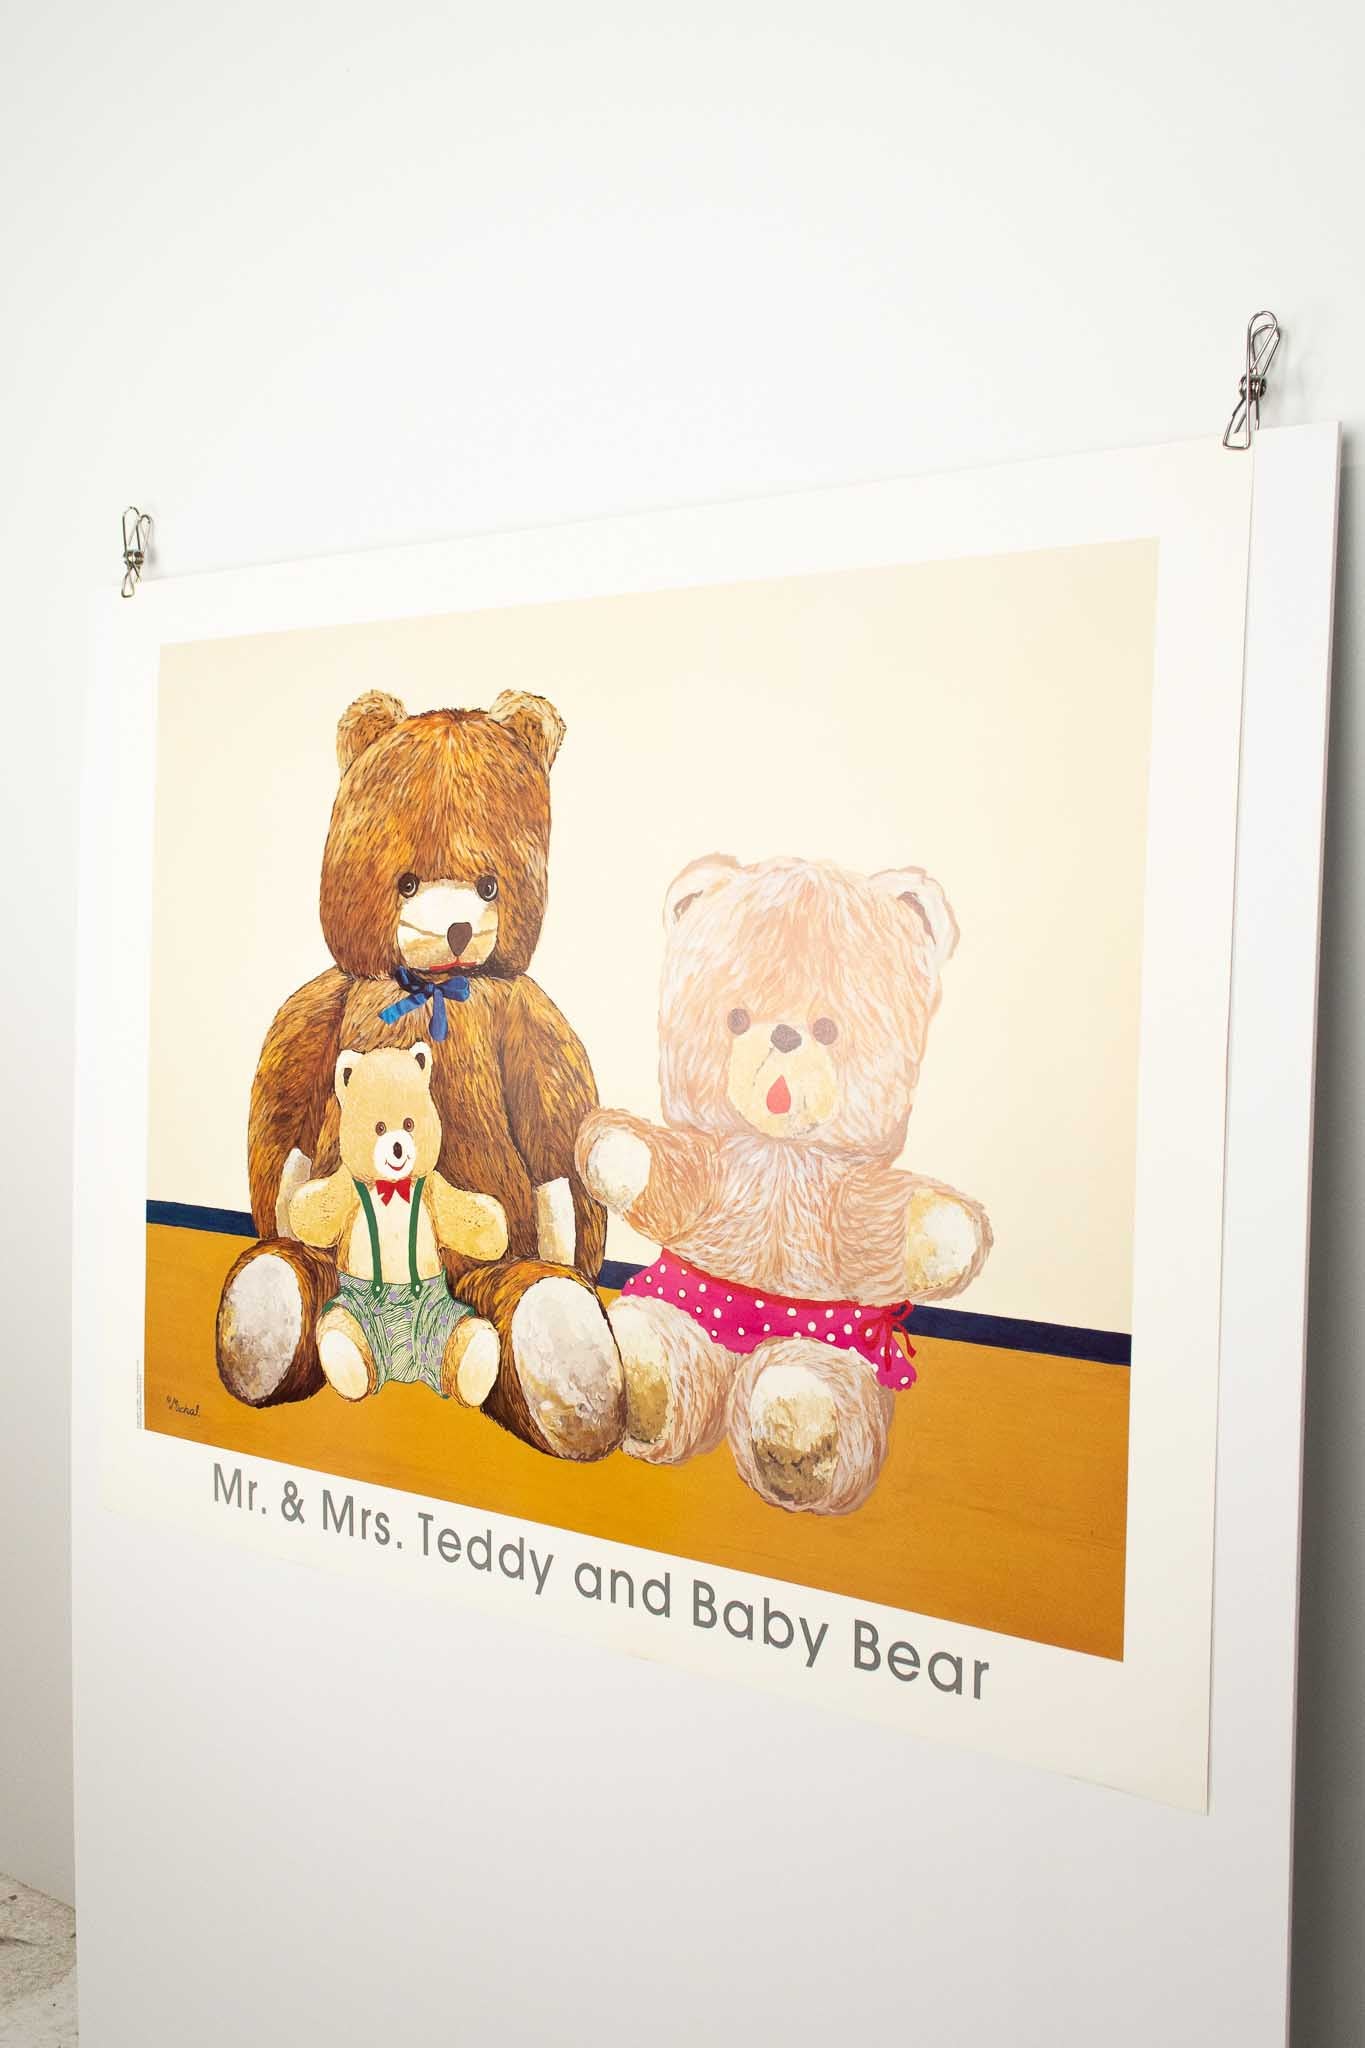 Michal "Mr. and Mrs. Teddy and Baby Bear" Print